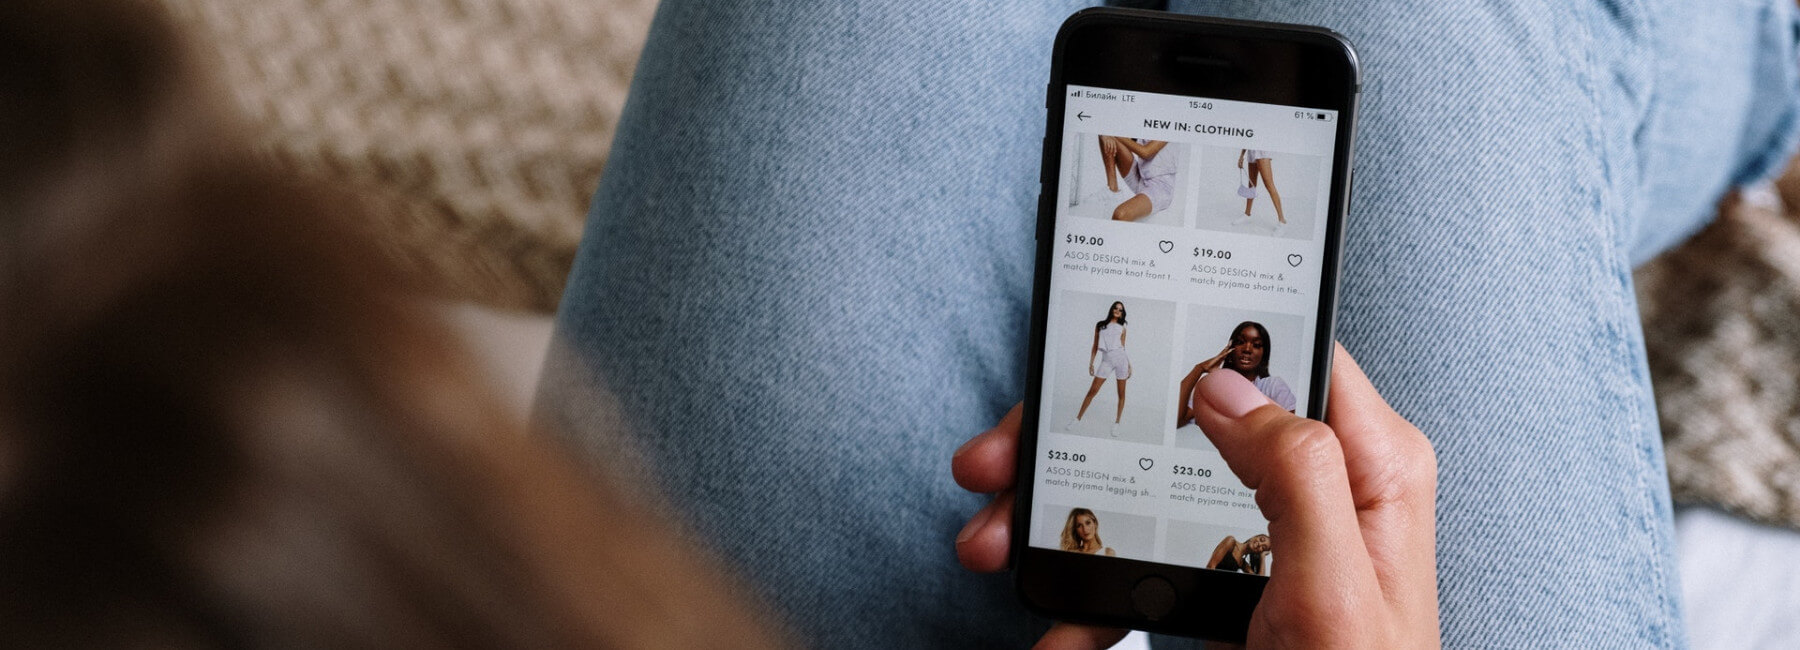 Why Mobile Commerce has Become Critical for Retailers